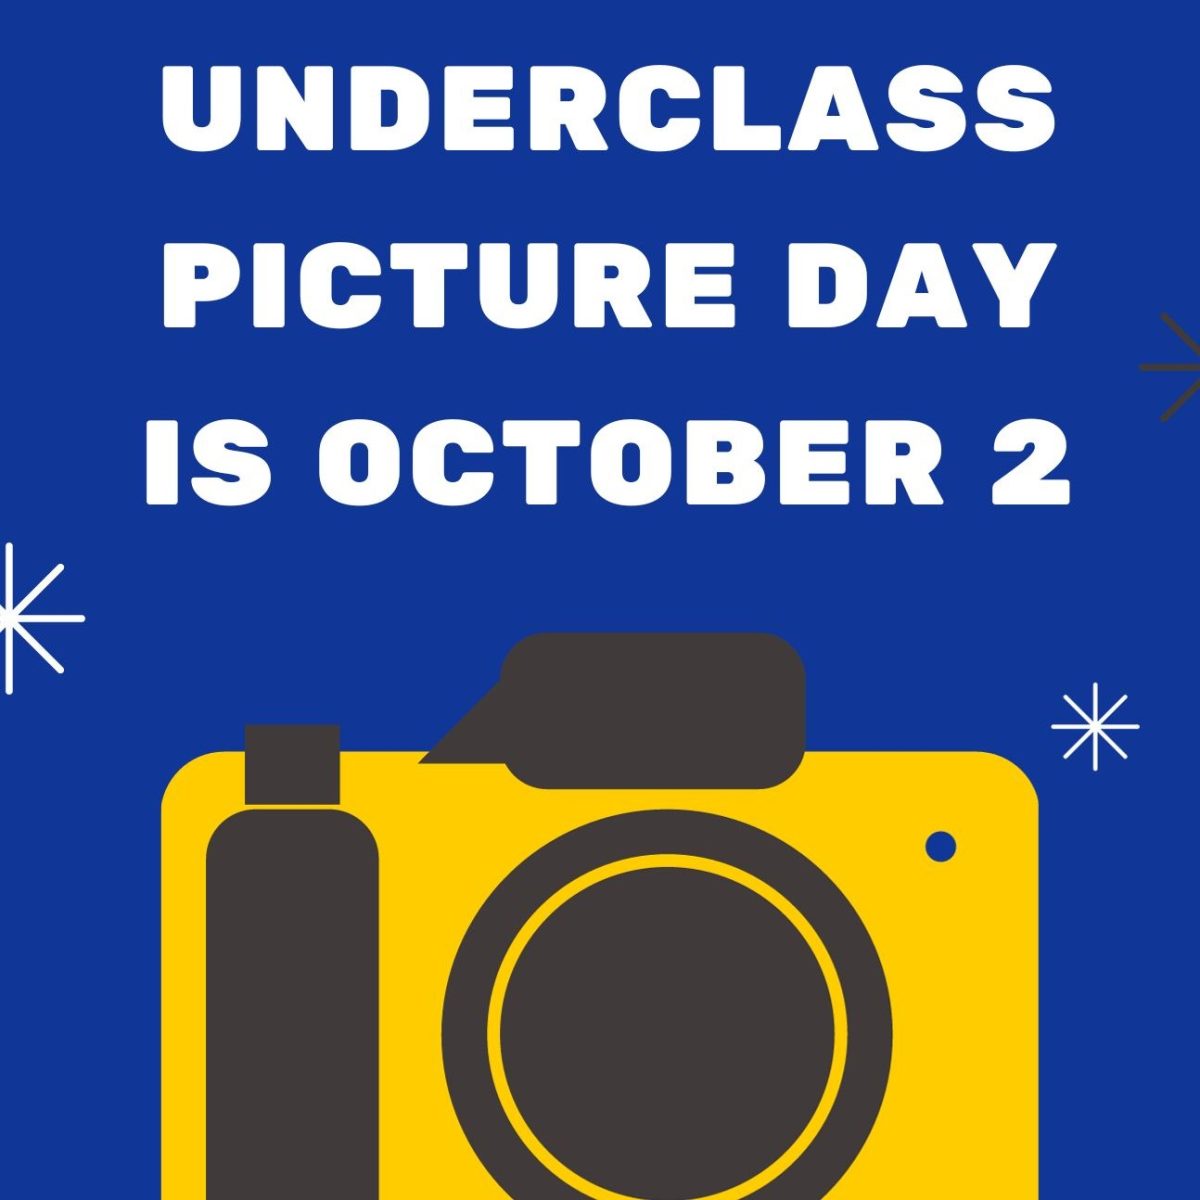 Underclass+Picture+Day+is+October+2